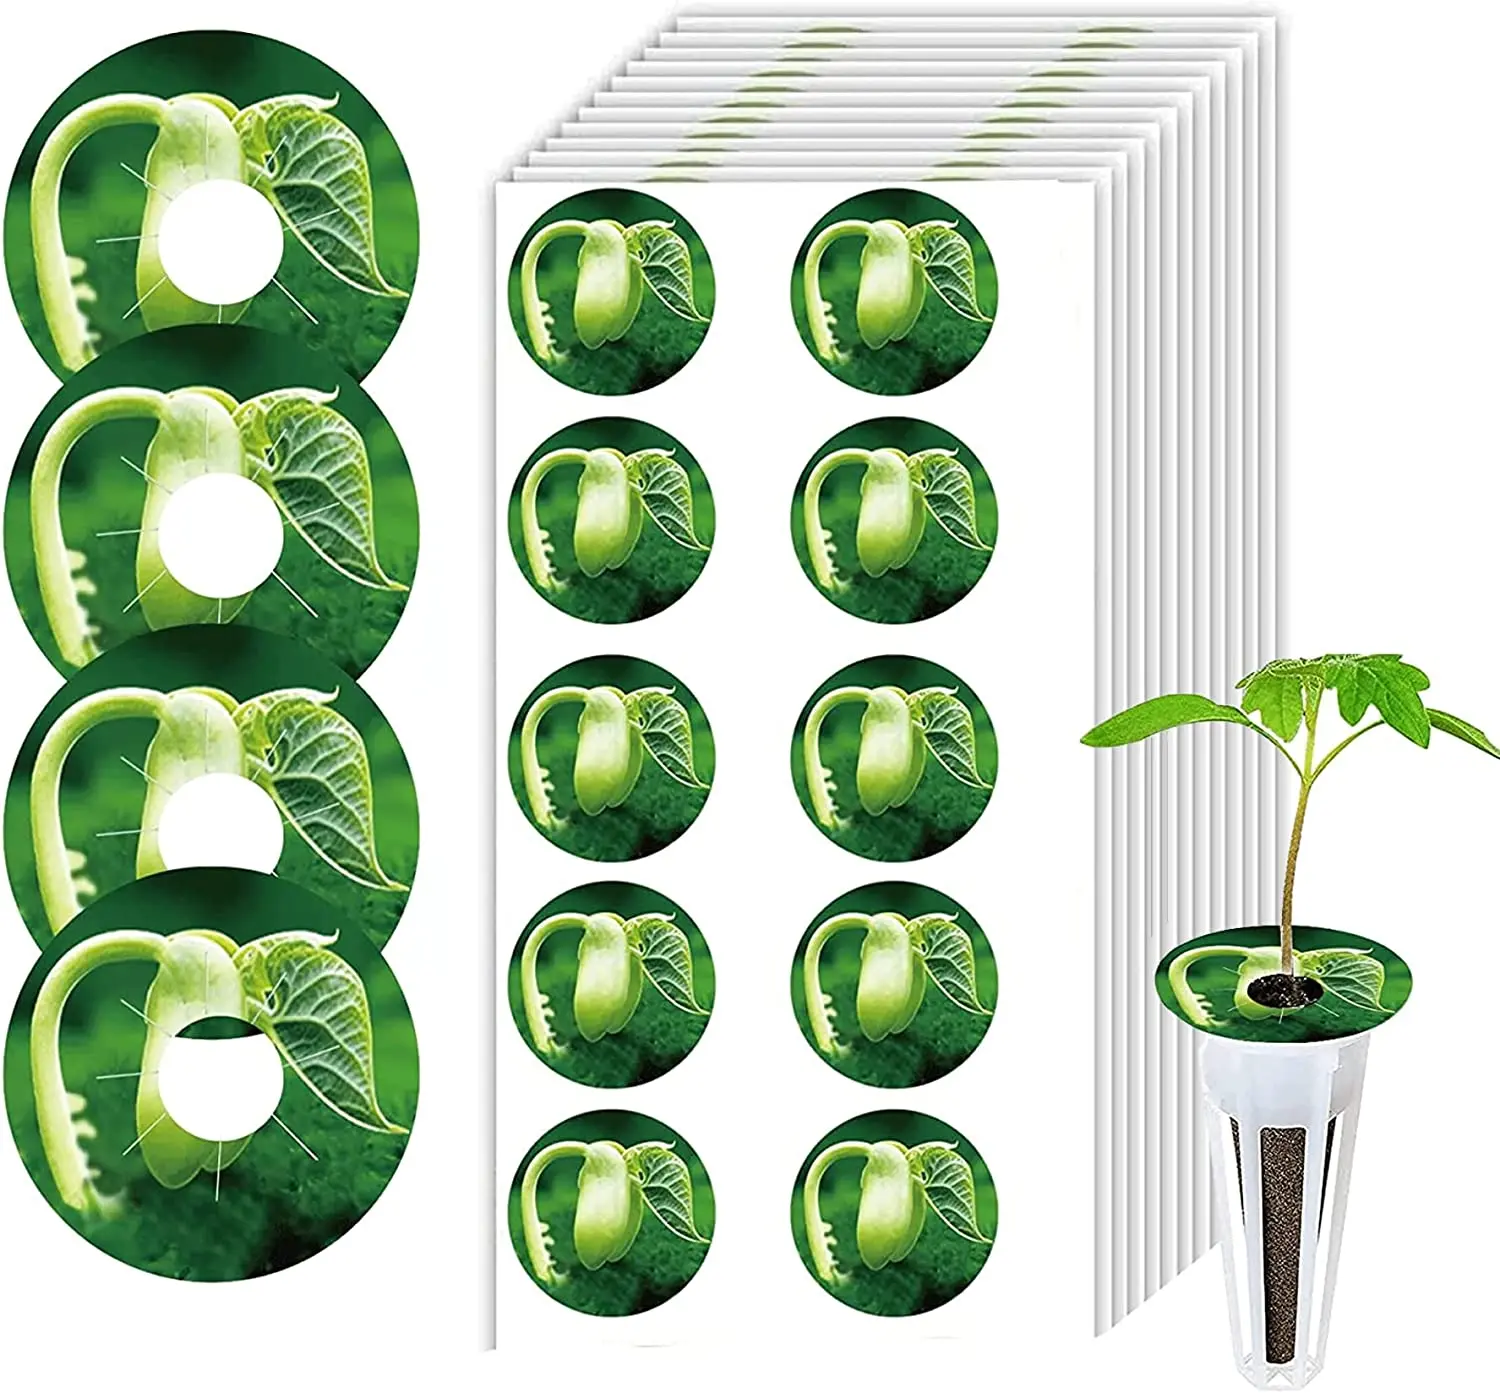 100 pcs Anti-moss Seed Pot L abels PVC Stickers Peel and Stick Hydroponic Tags ForAerogarden Seed Pods Garden Plant Grow Basket